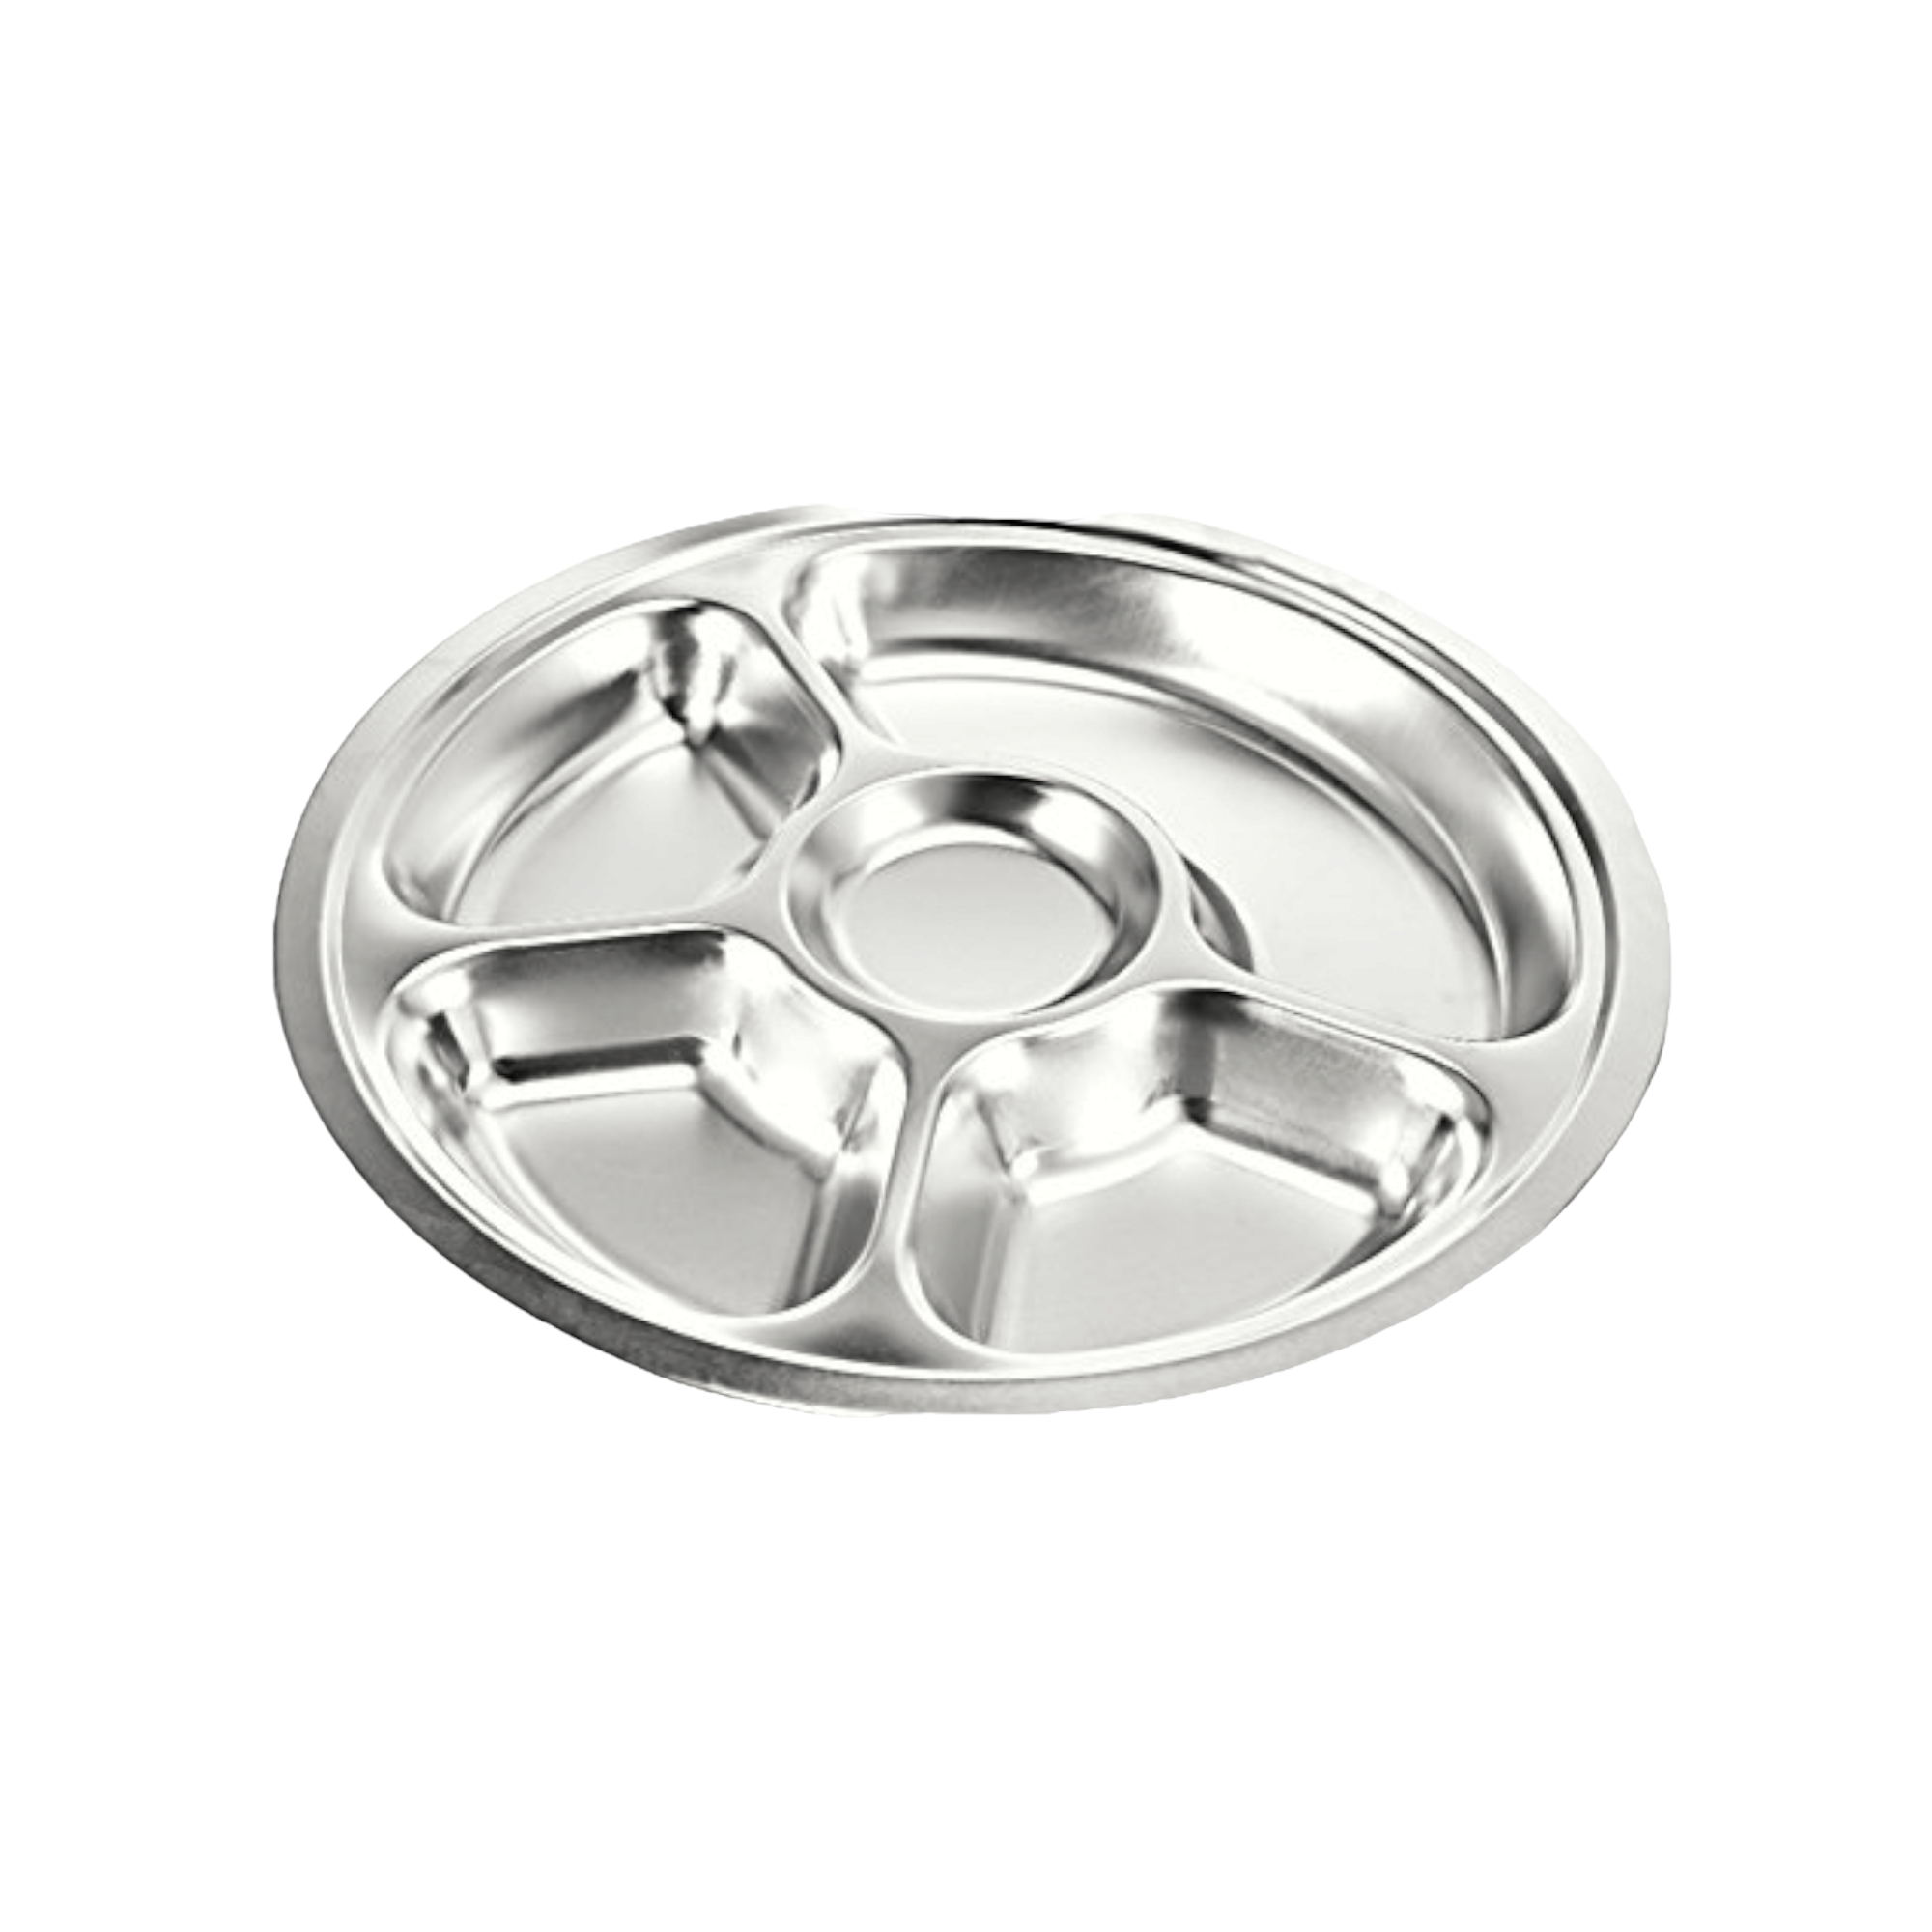 Round Stainless Steel 5 Division Snack Tray